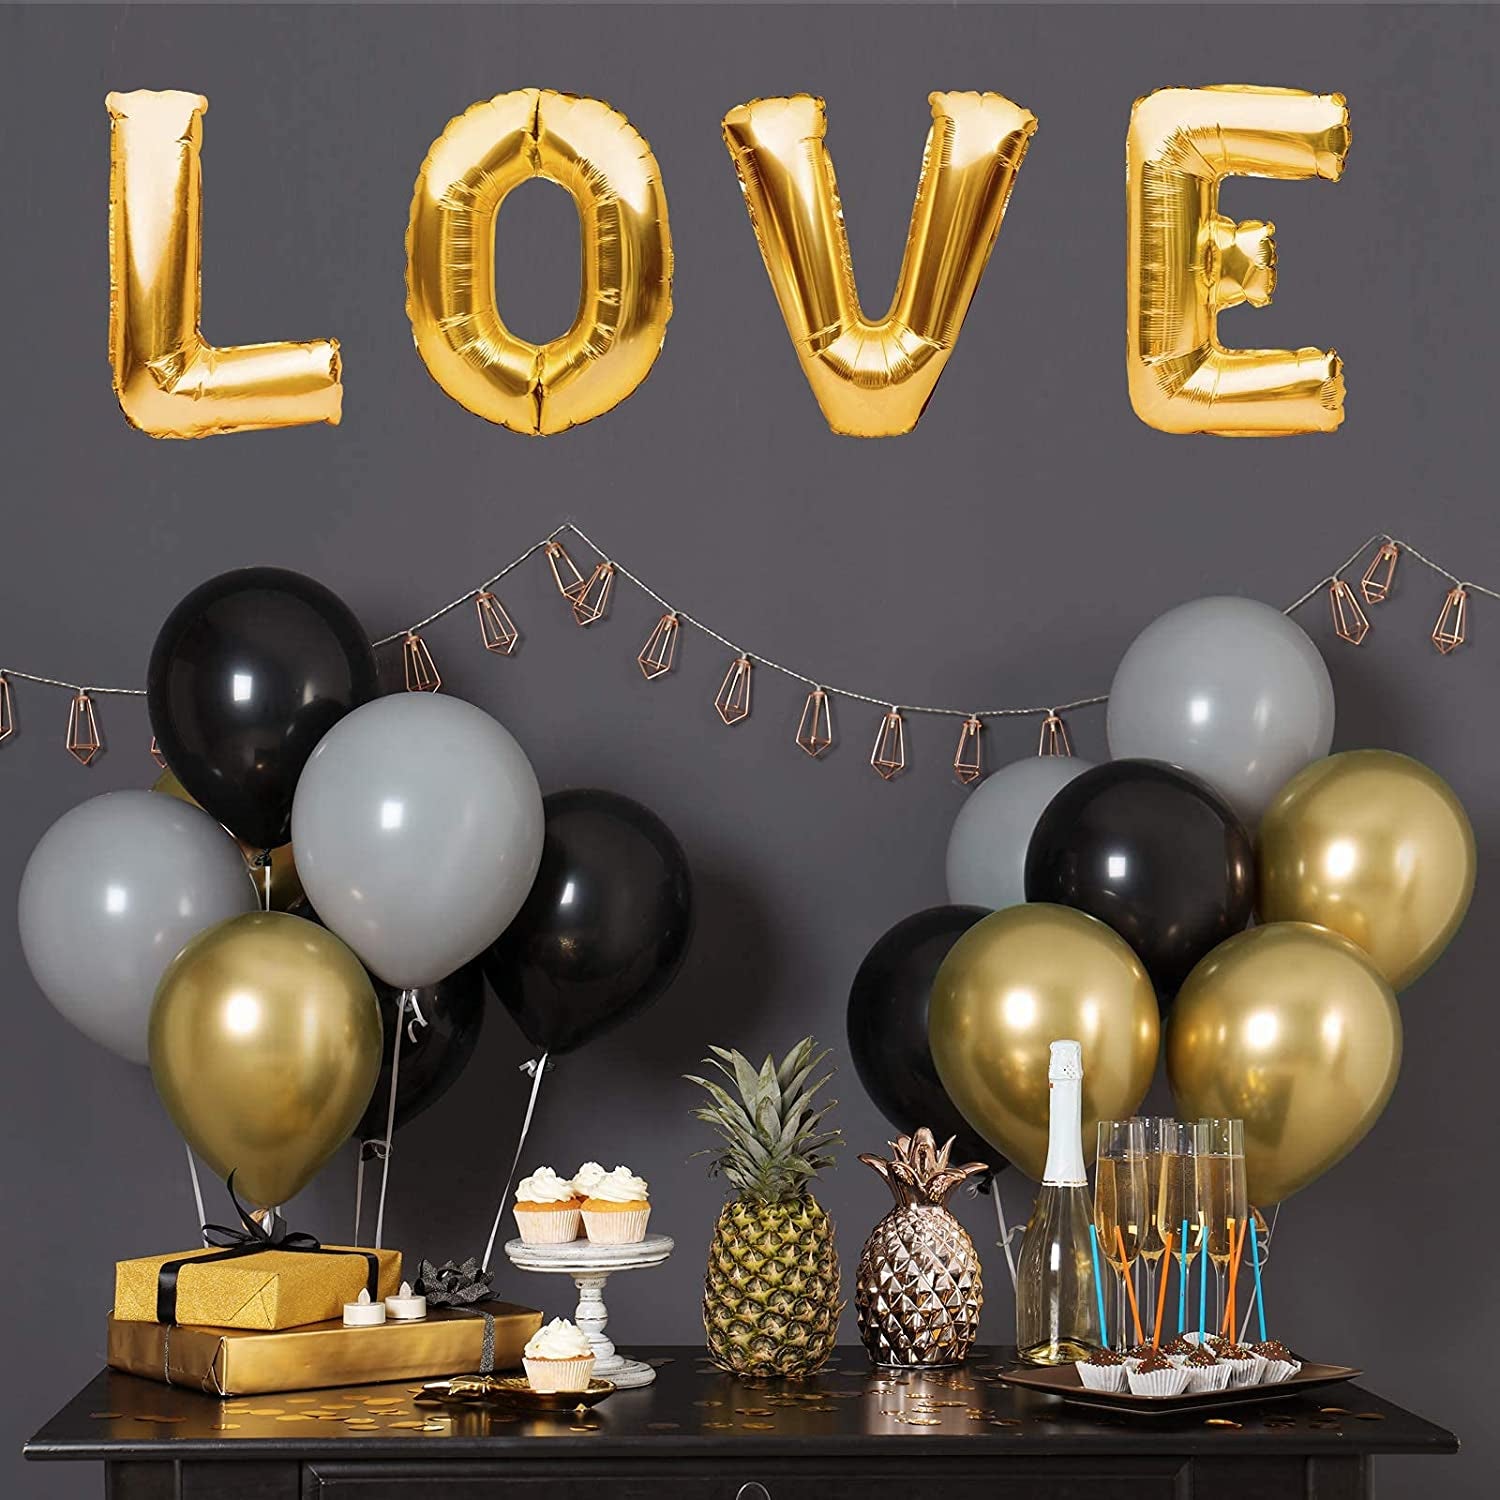 Metallic Gold Balloons - 4 Sizes, 18/12/10/5 inches - Latex Balloons for Party